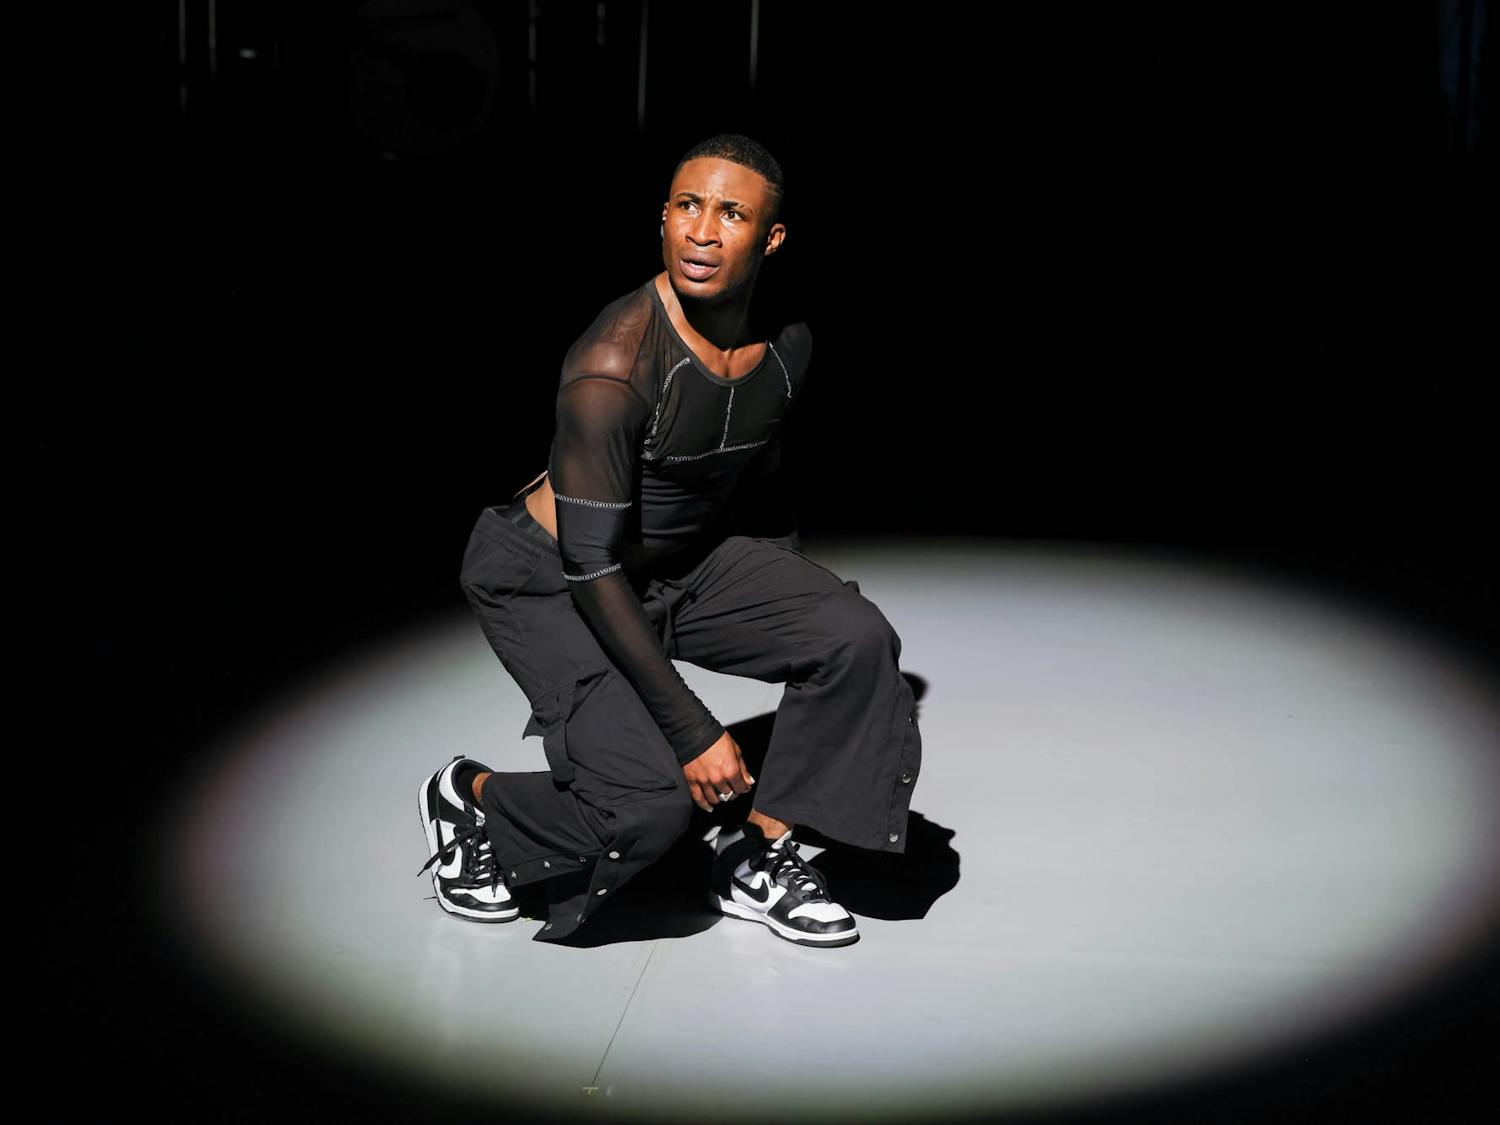 "They Do Not Know Harlem," an immersive performance by Tristan André will be on stage at PlayMakers Repertory Company until March 12, 2023.
Photo courtesy of HuthPhoto.